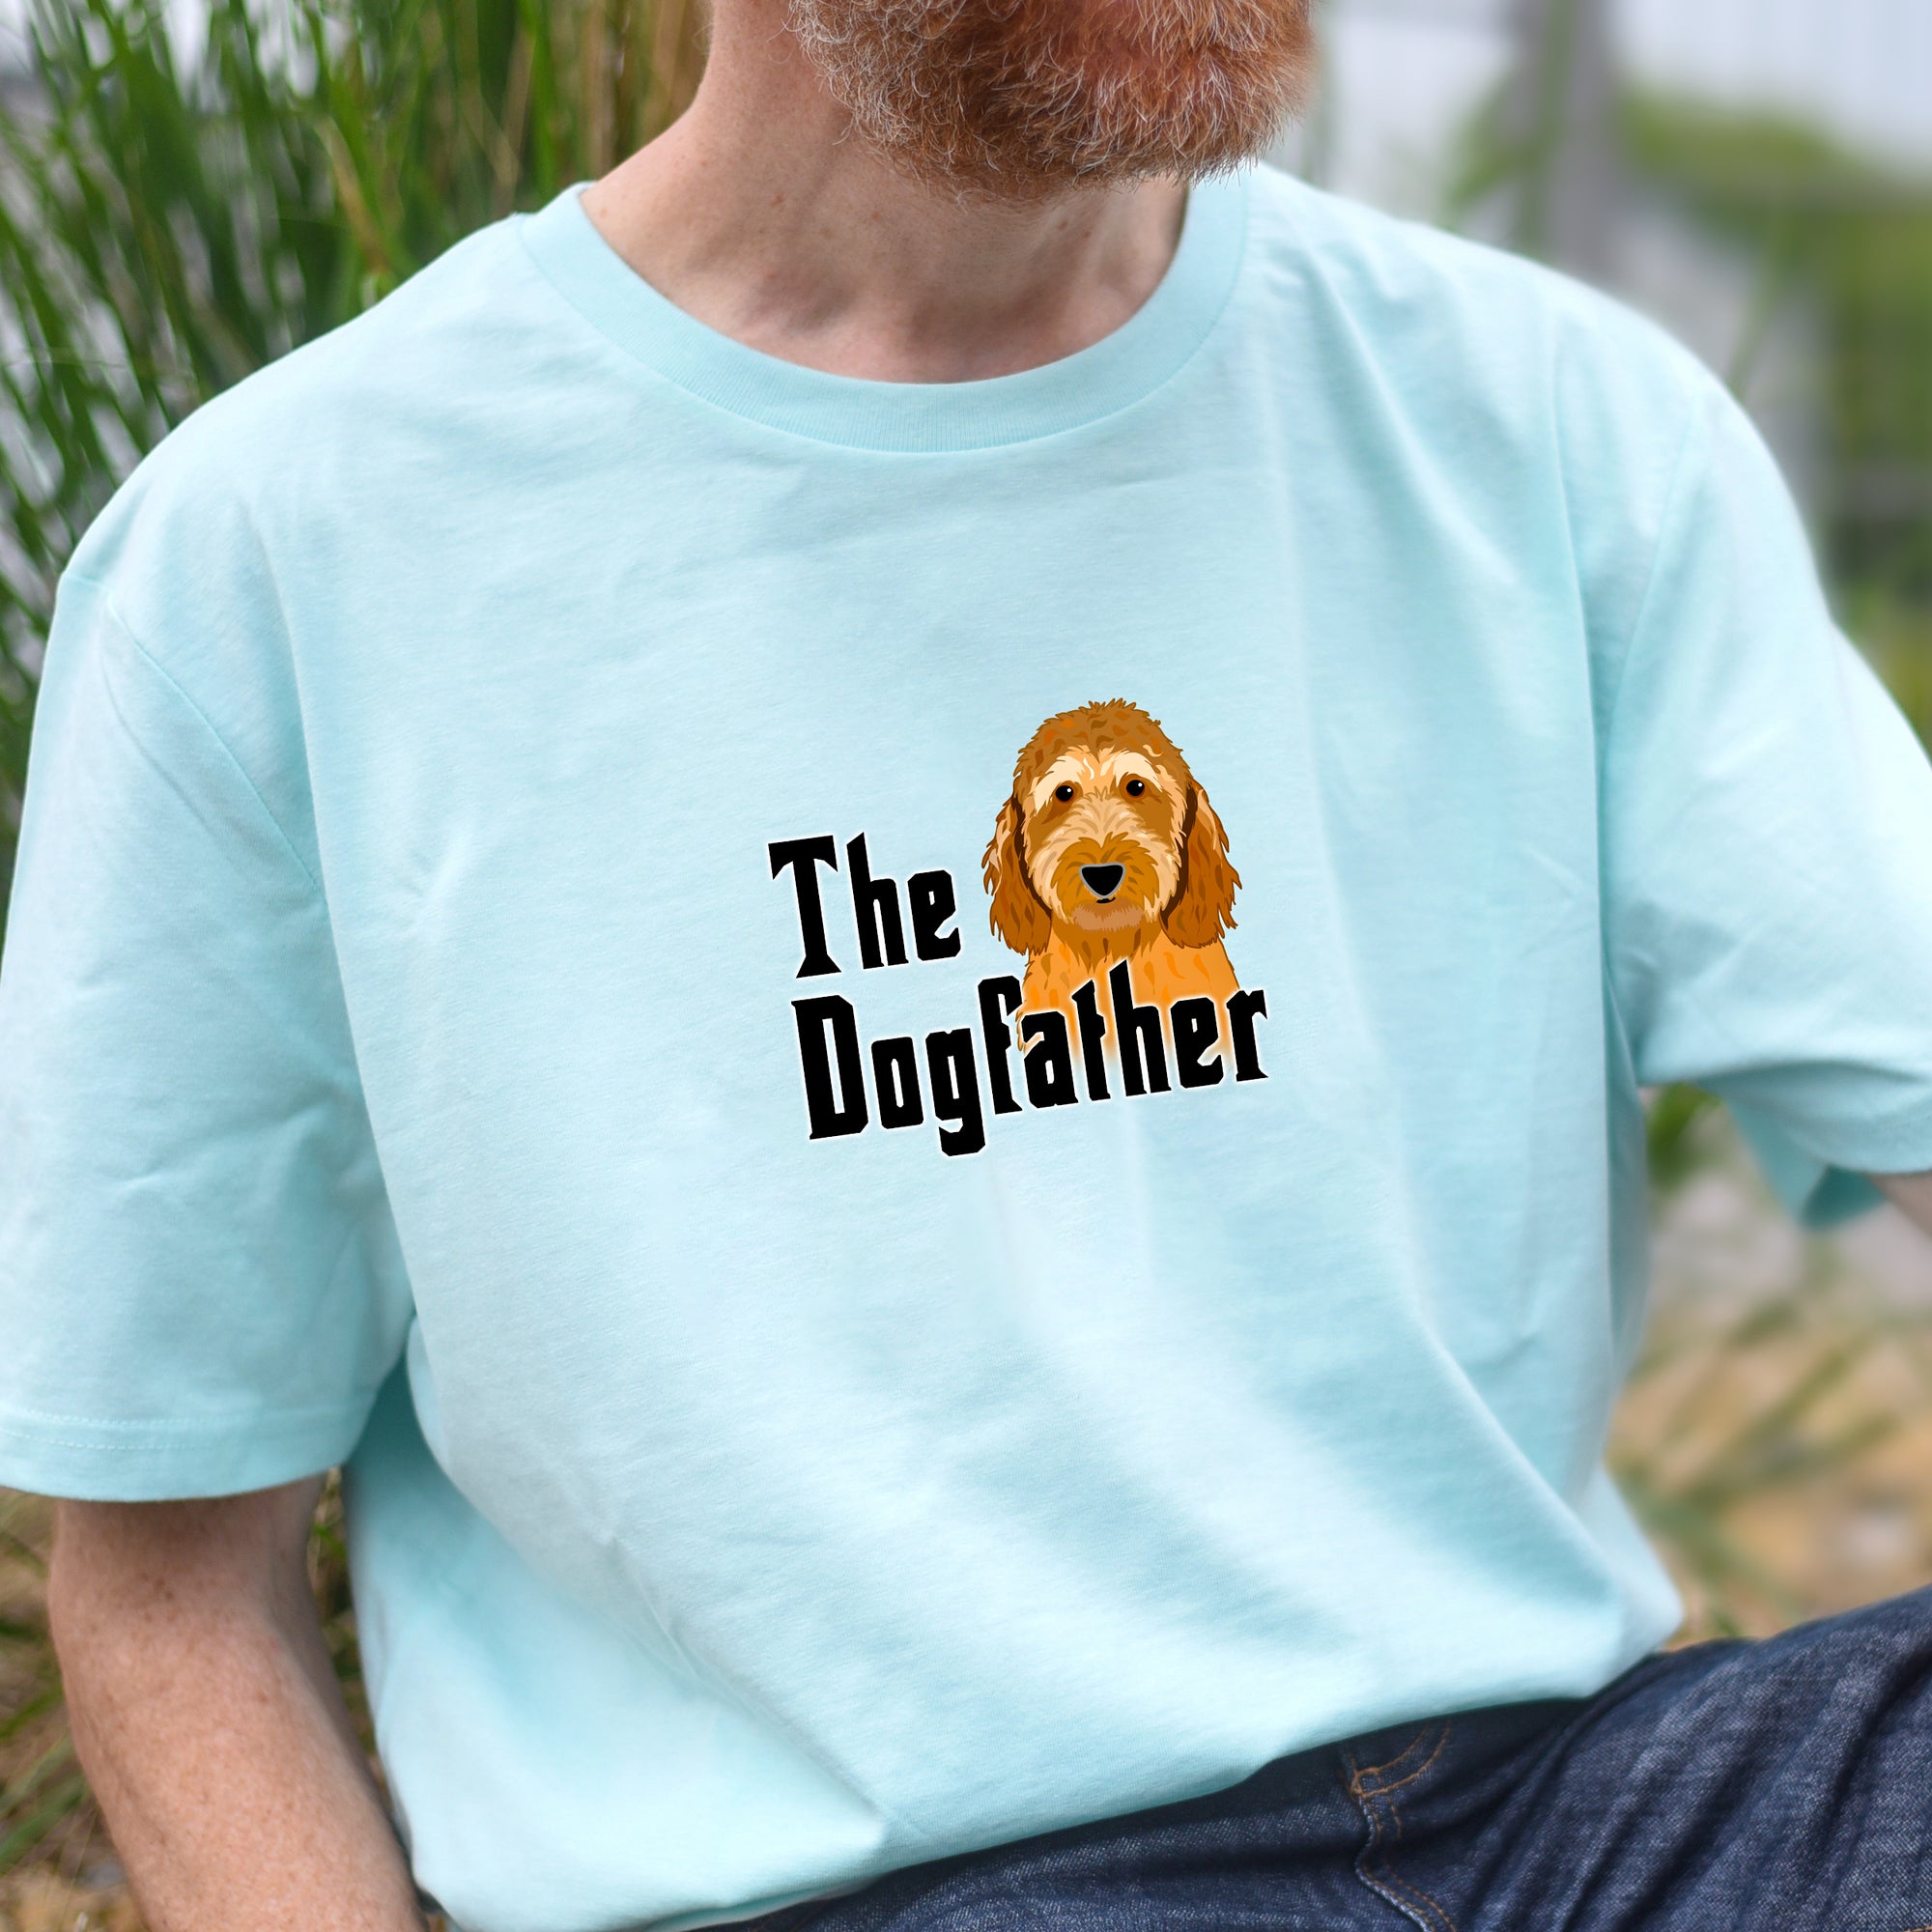 The Dogfather Illustrated T-shirt